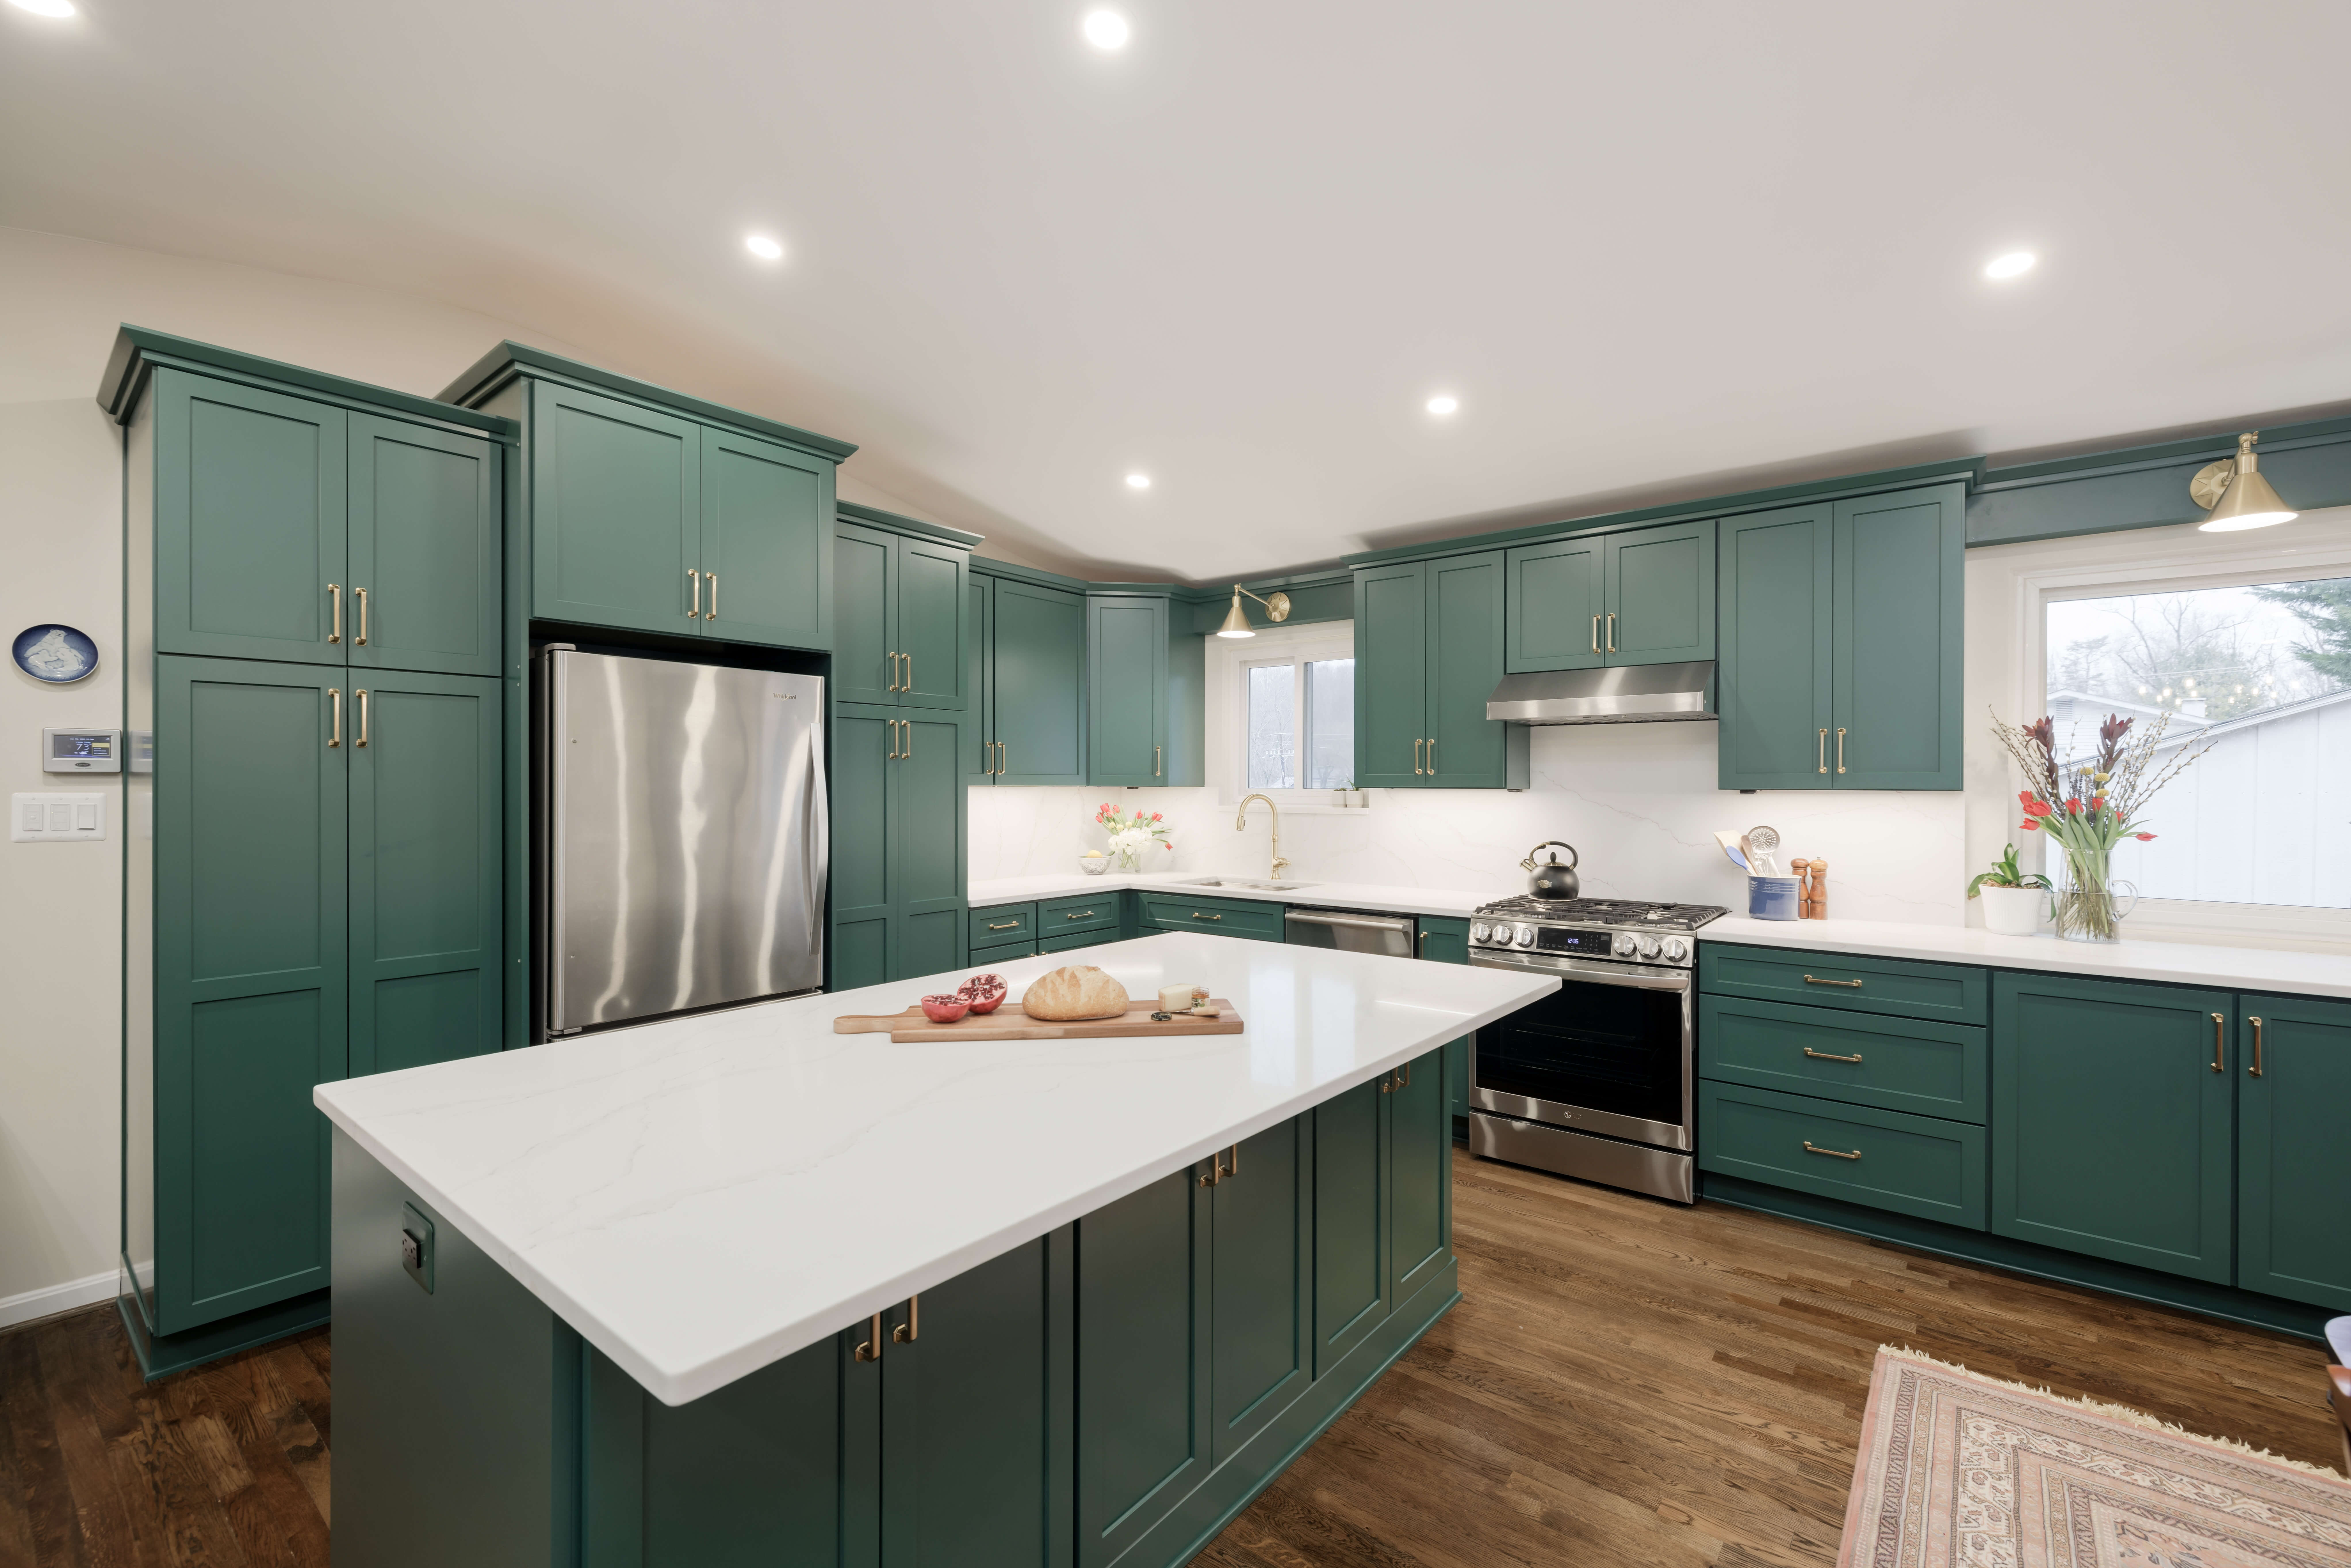 A teal/blue kitchen with a colorful custom painted cabinets with a shaker door styl